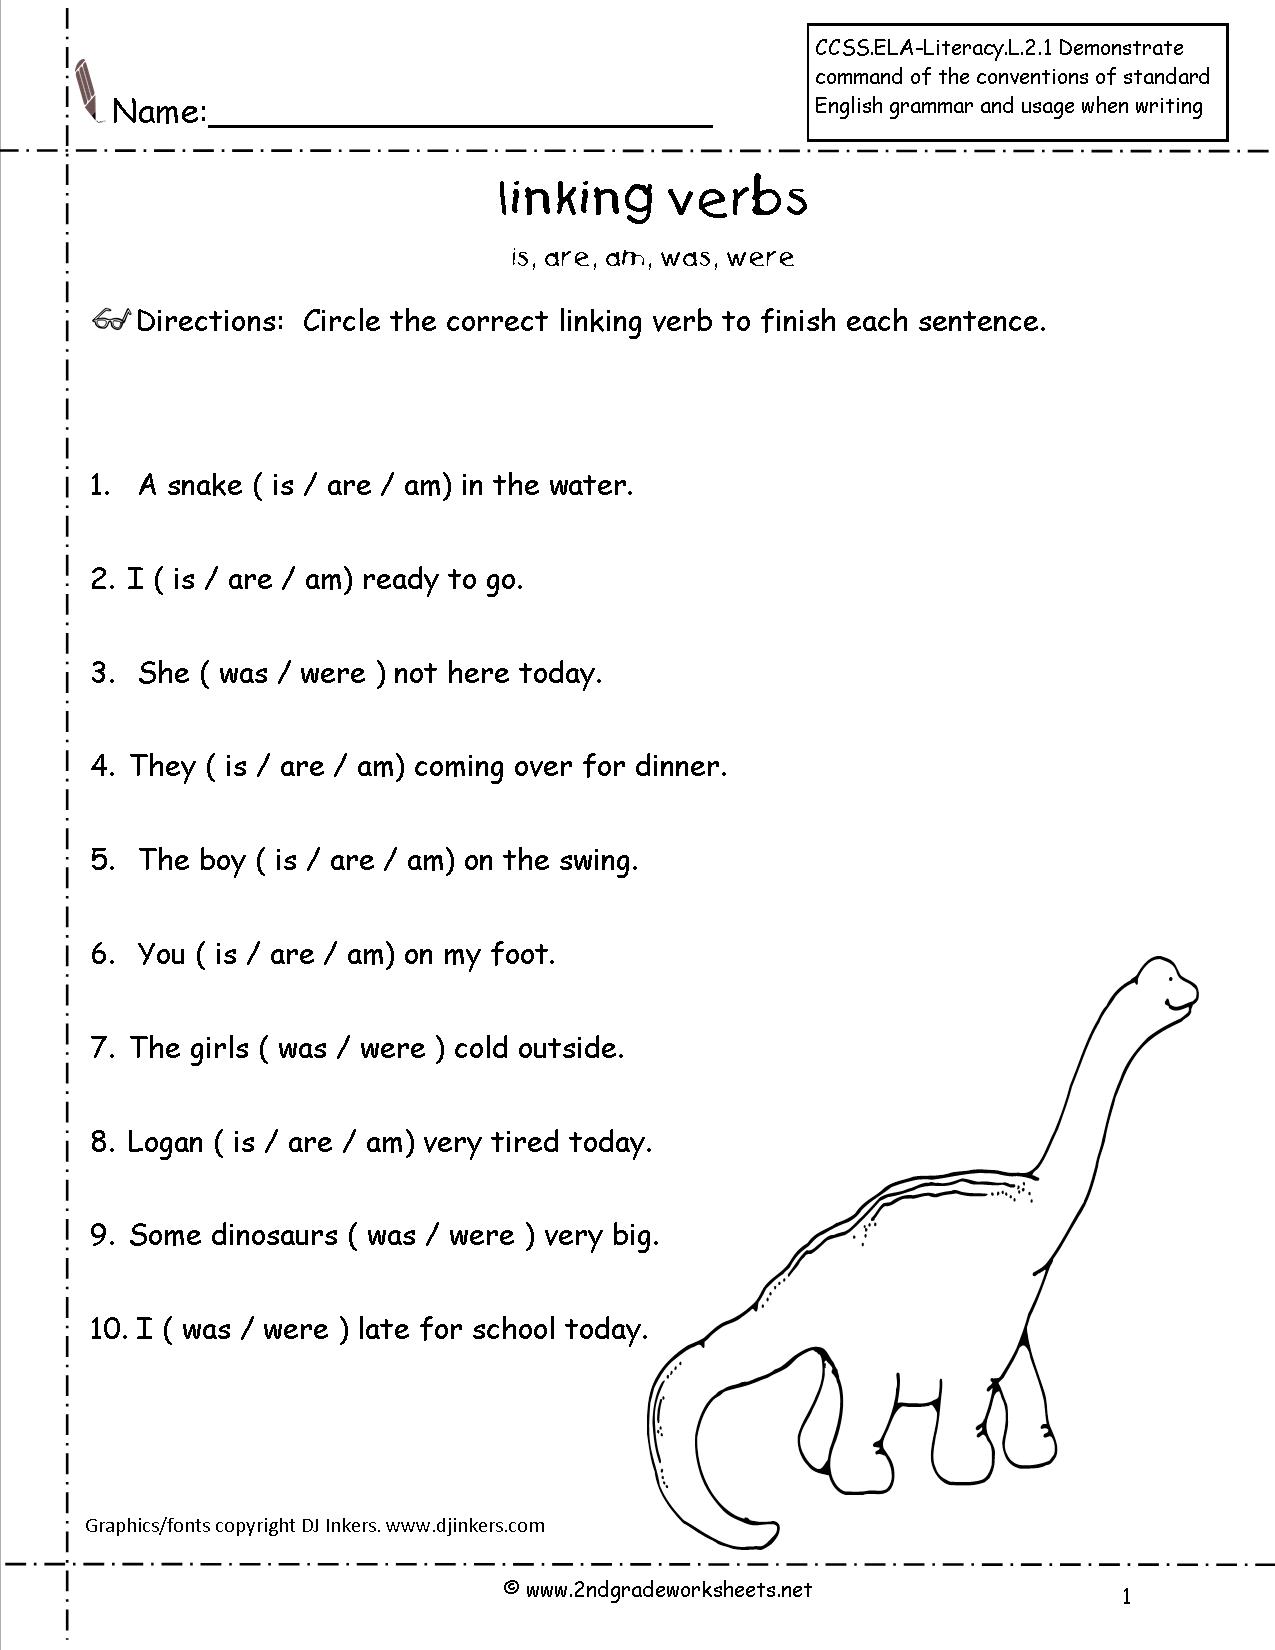 Linking Verbs Worksheets For Grade 3